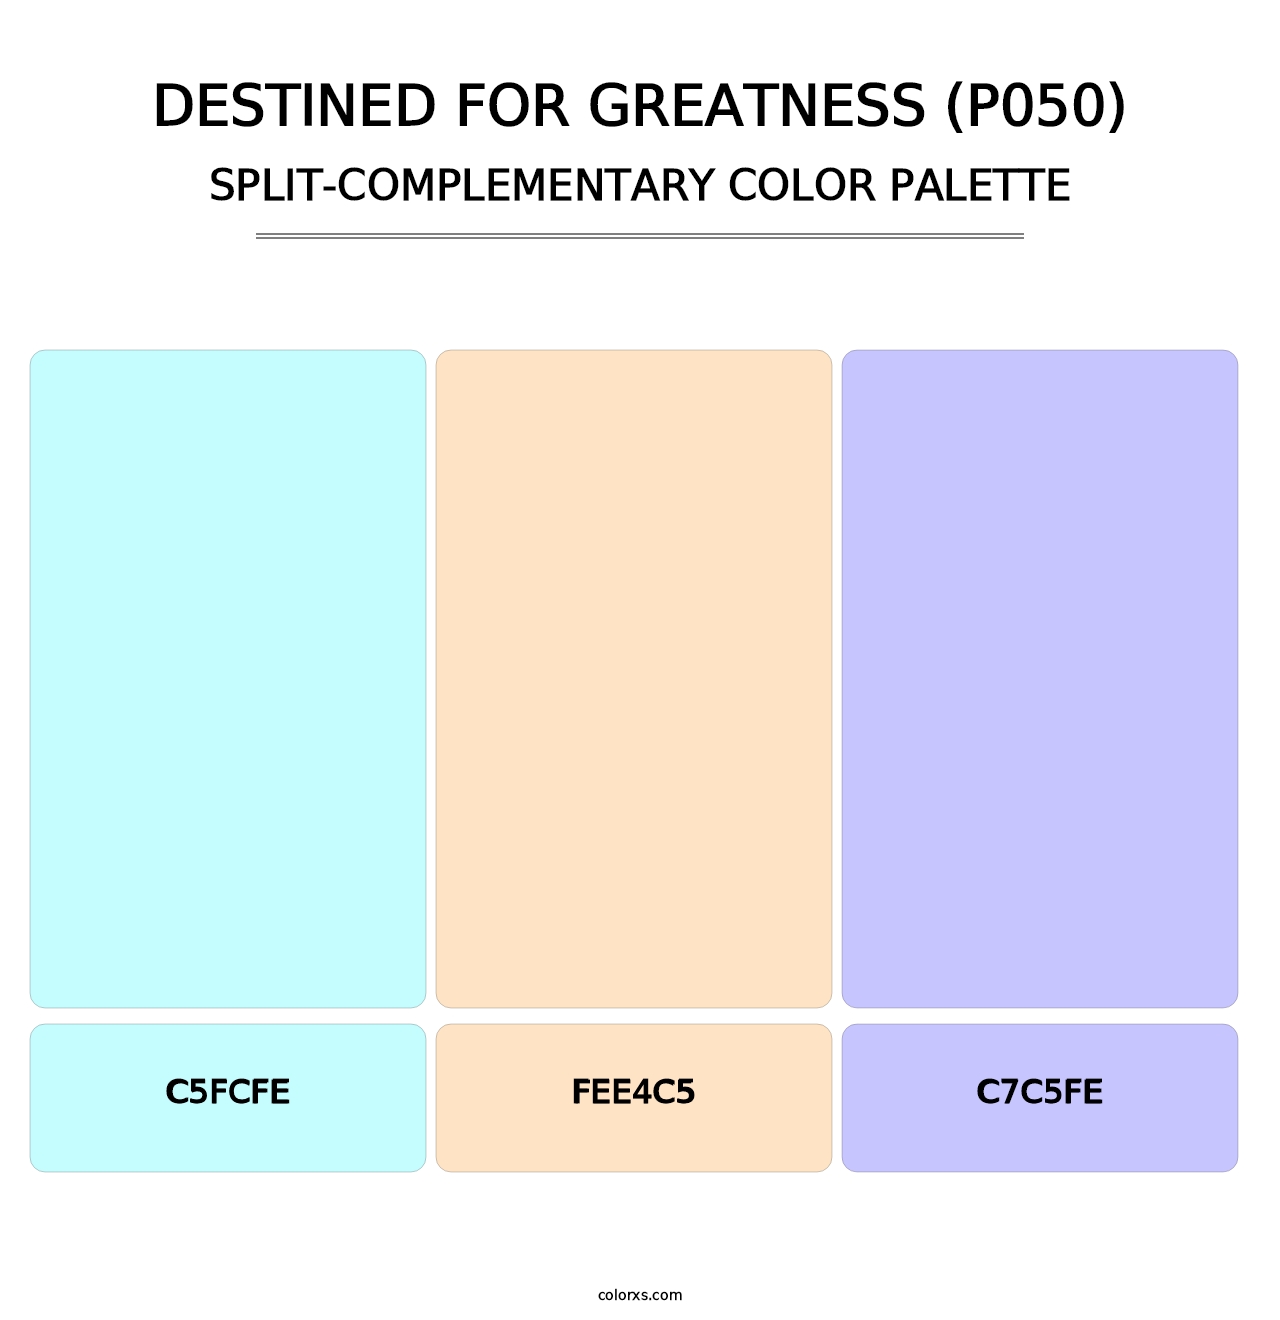 Destined for Greatness (P050) - Split-Complementary Color Palette